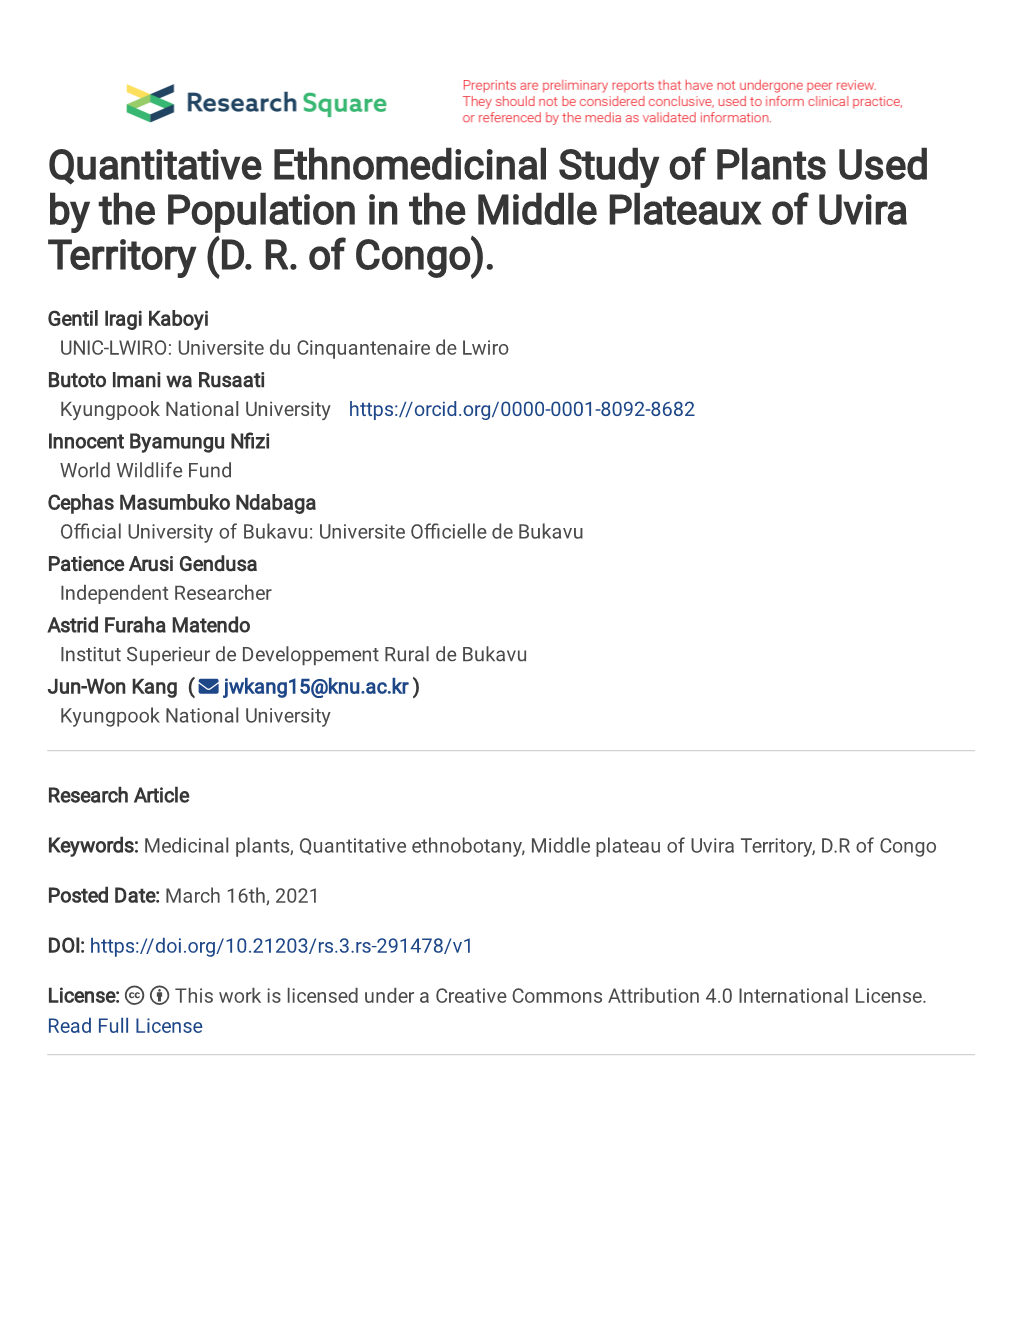 Quantitative Ethnomedicinal Study of Plants Used by the Population in the Middle Plateaux of Uvira Territory (D